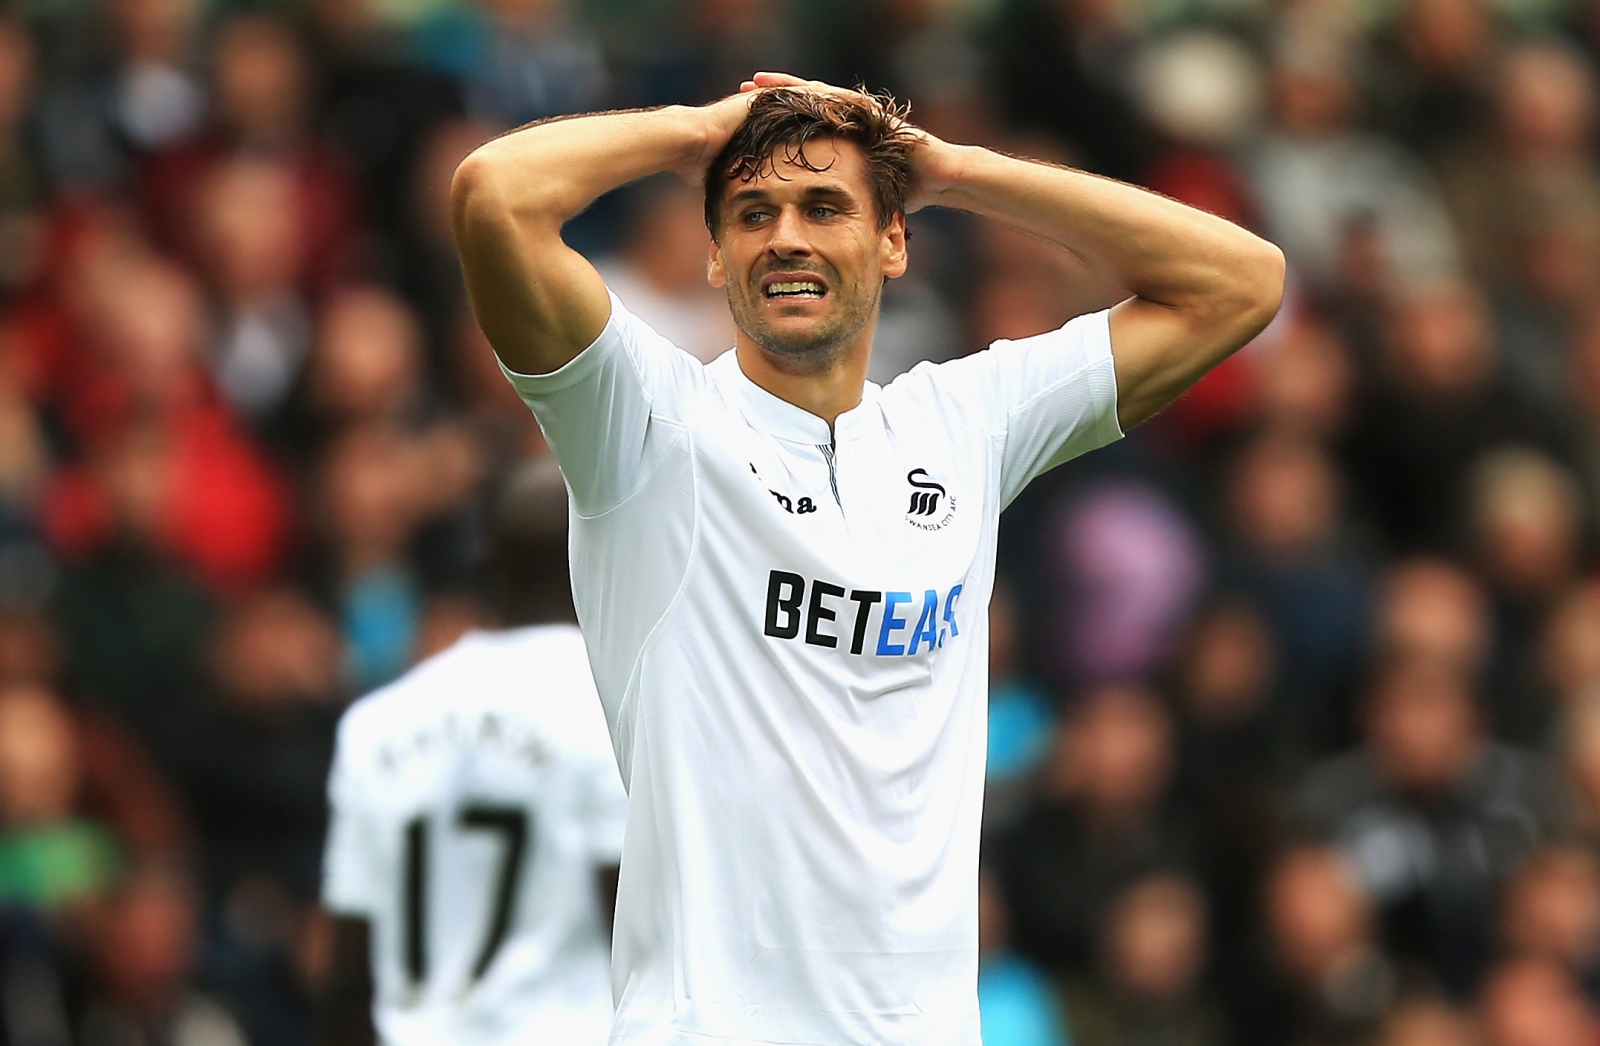 Swansea striker Fernando Llorente 'touch and go' for Tottenham clash after ankle knock